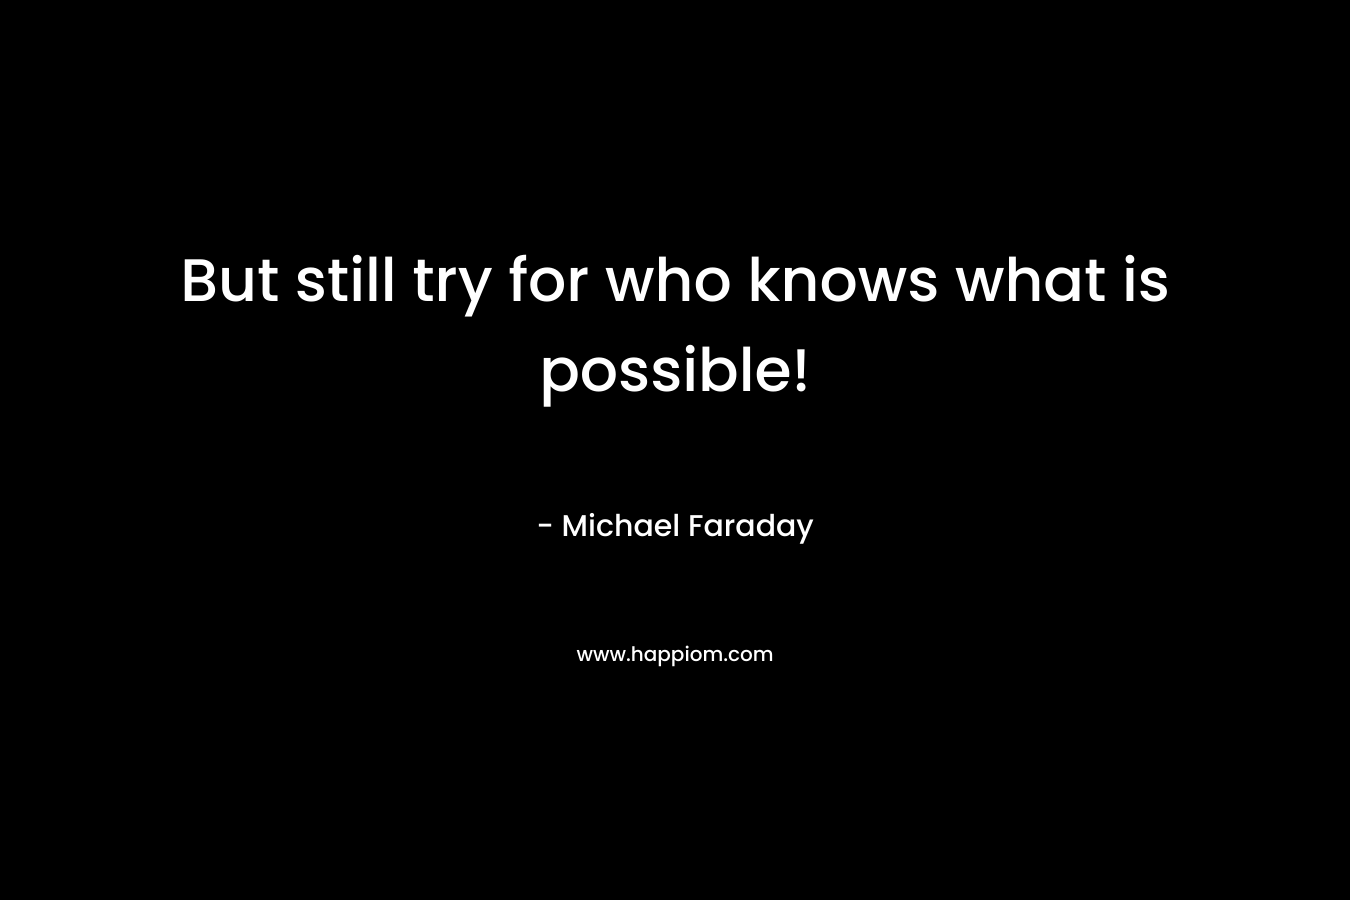 But still try for who knows what is possible!